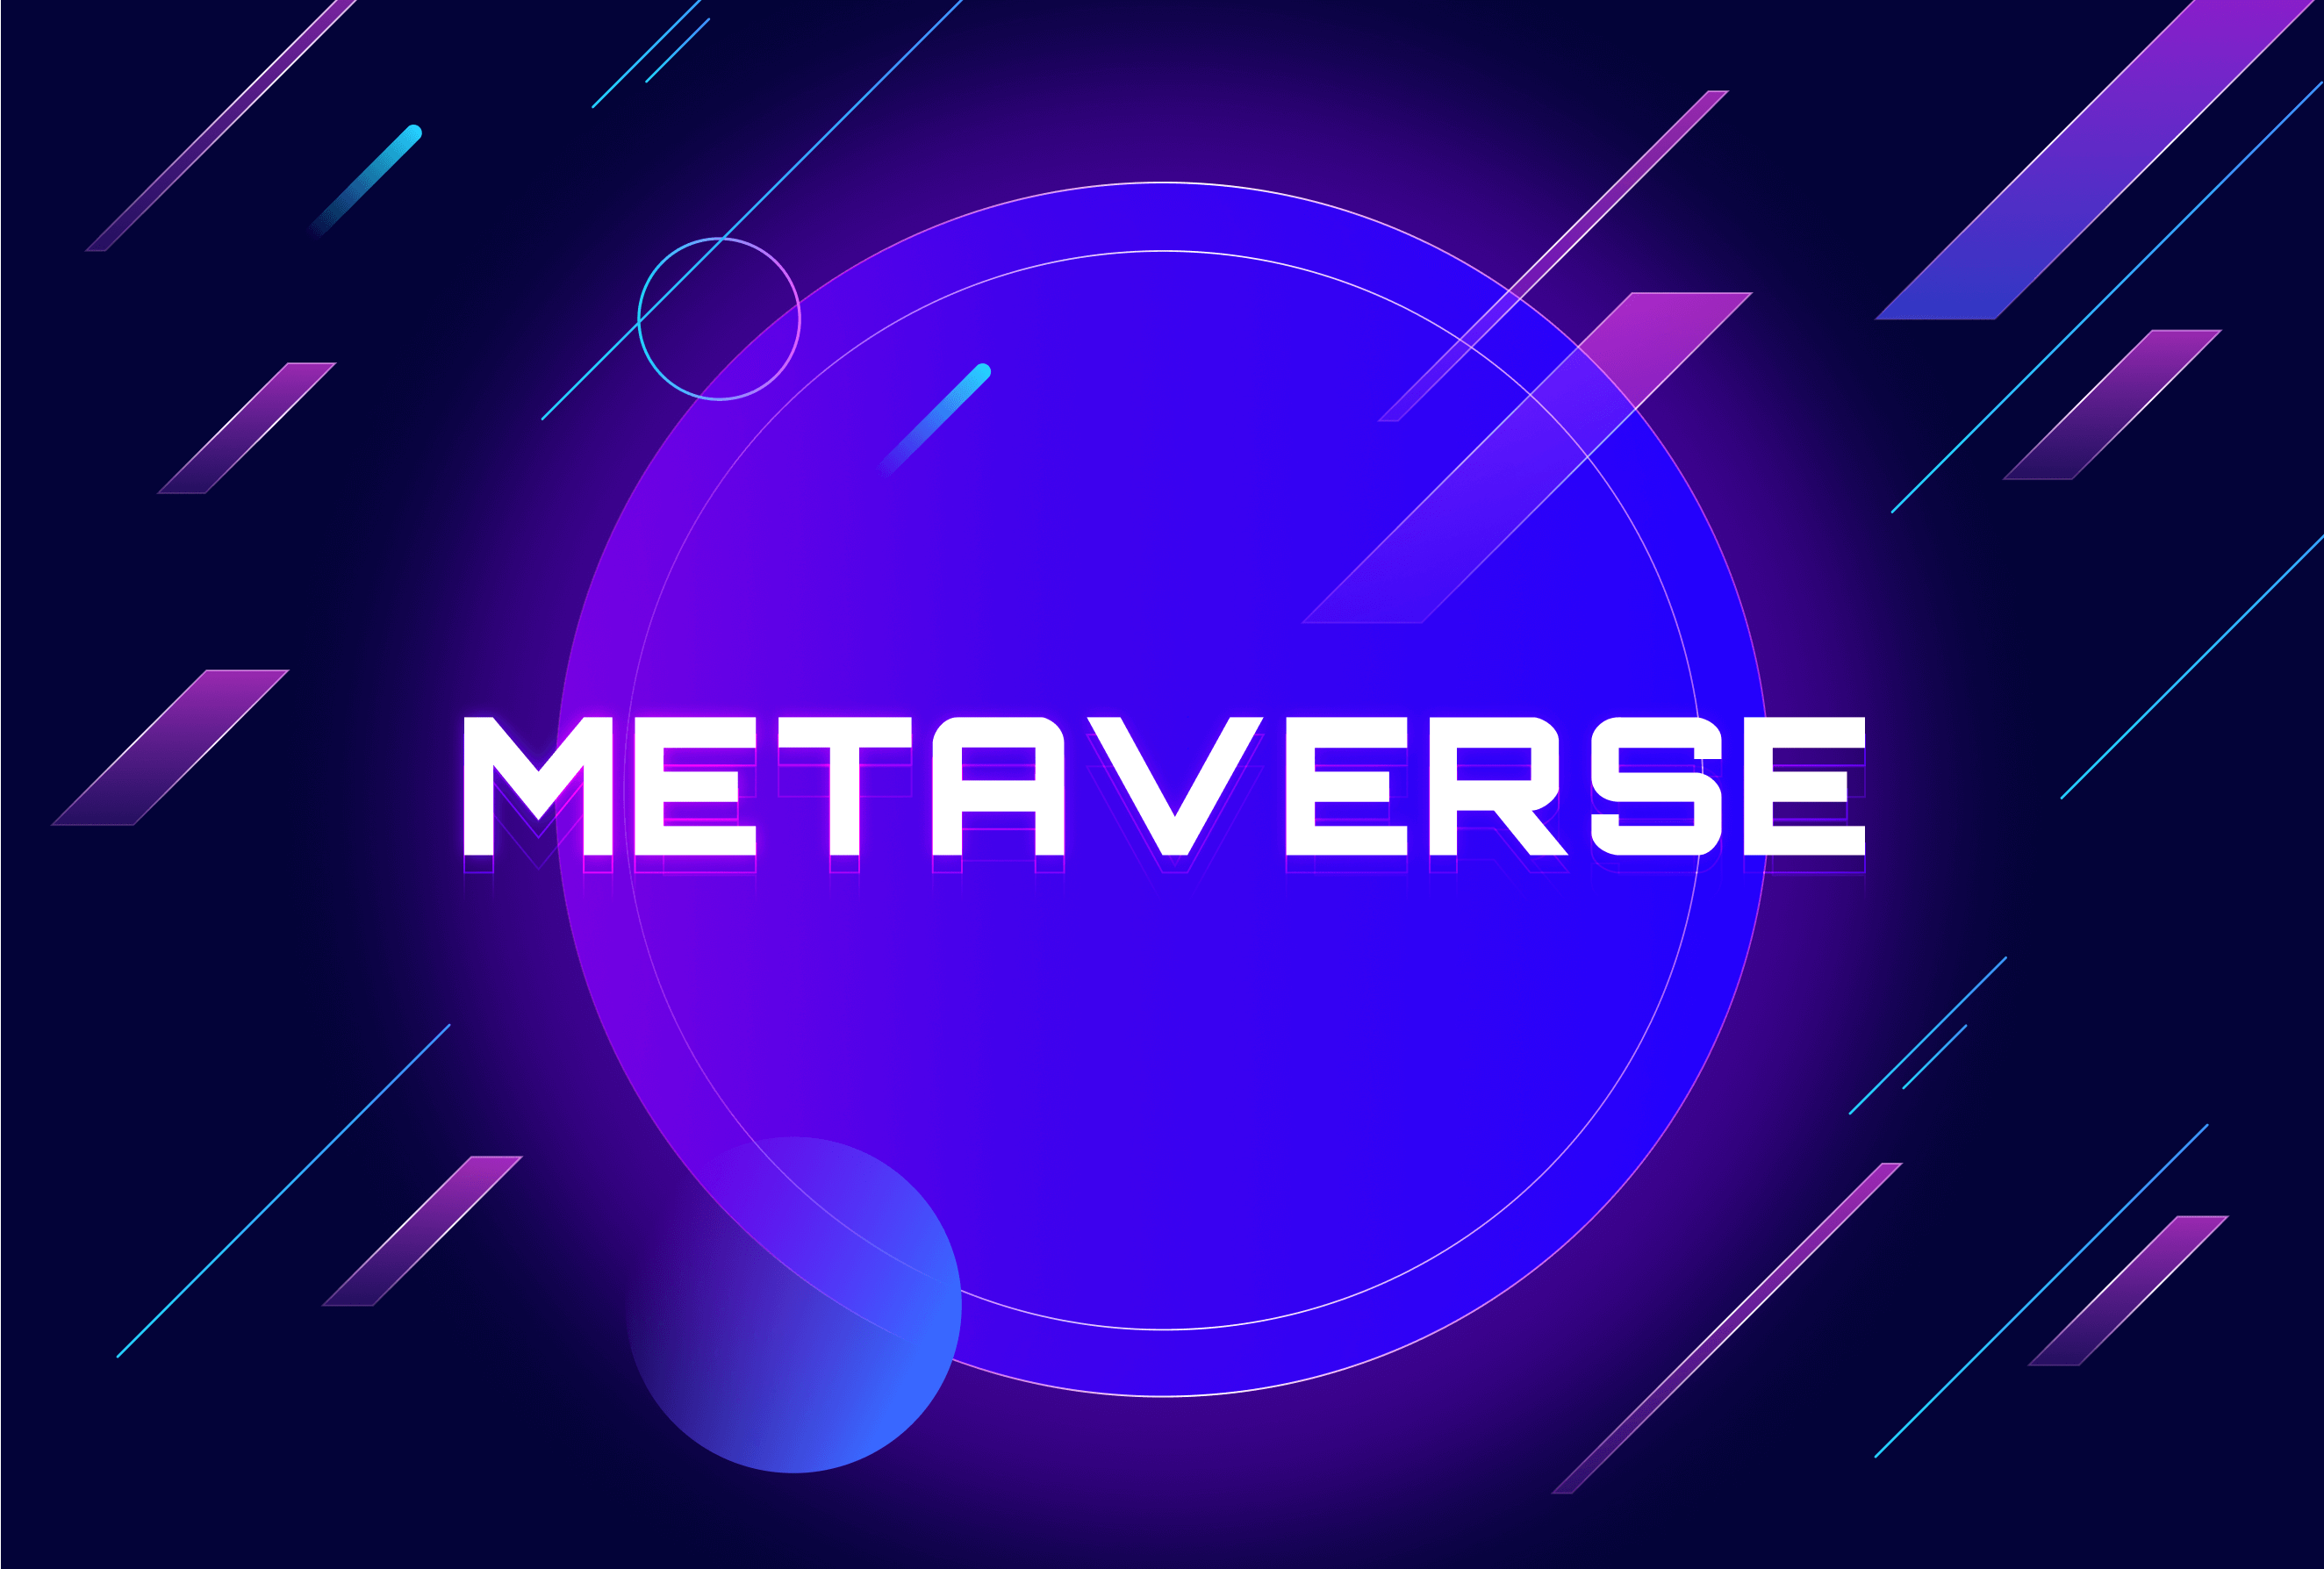 Exploring the Metaverse: What Does It Mean for the Future of the Internet?